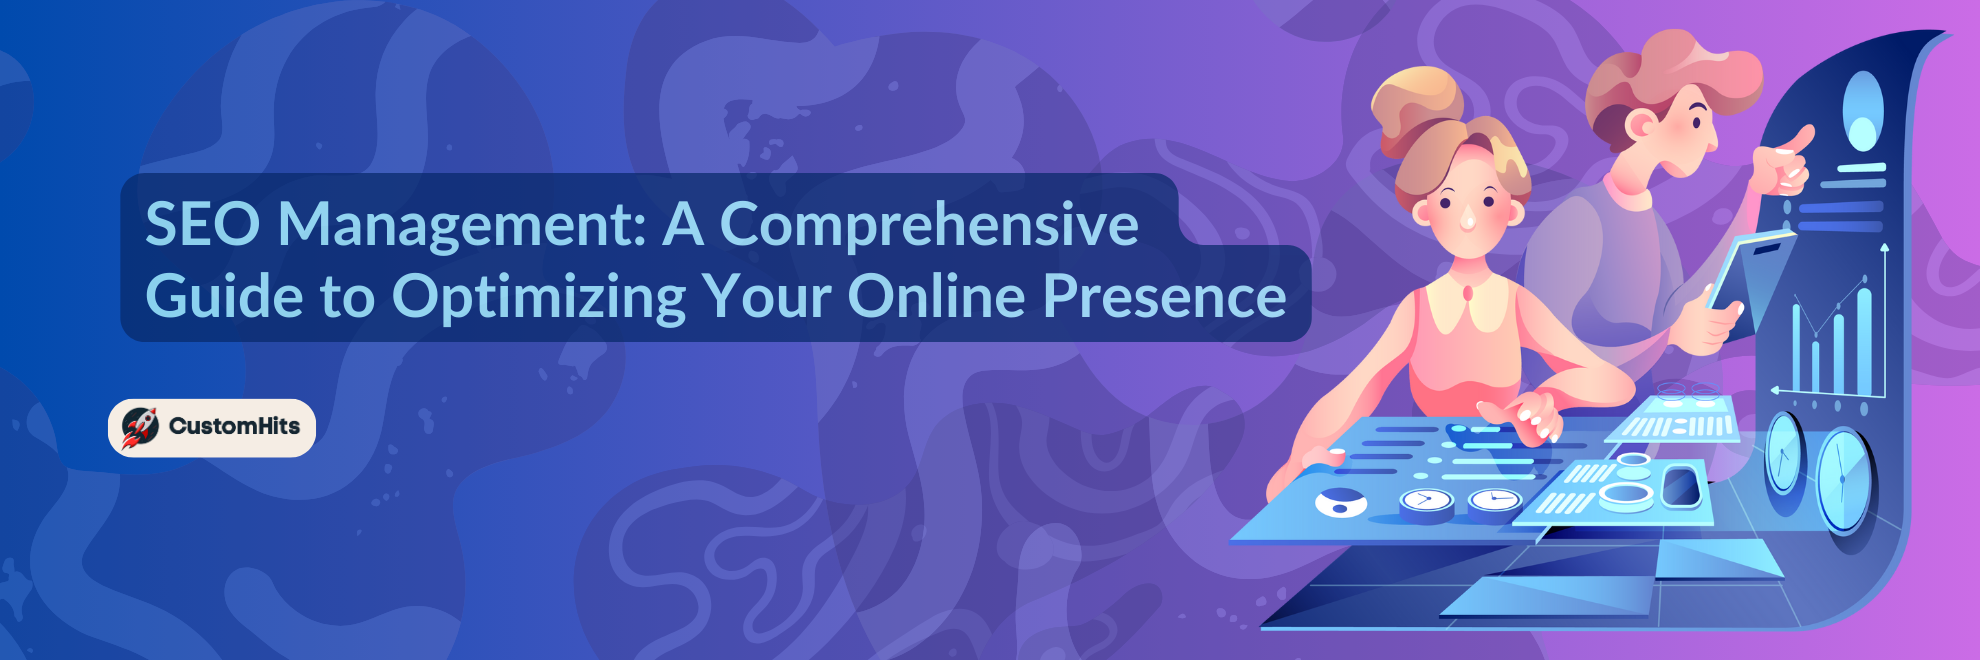 SEO Management: A Comprehensive Guide to Optimizing Your Online Presence